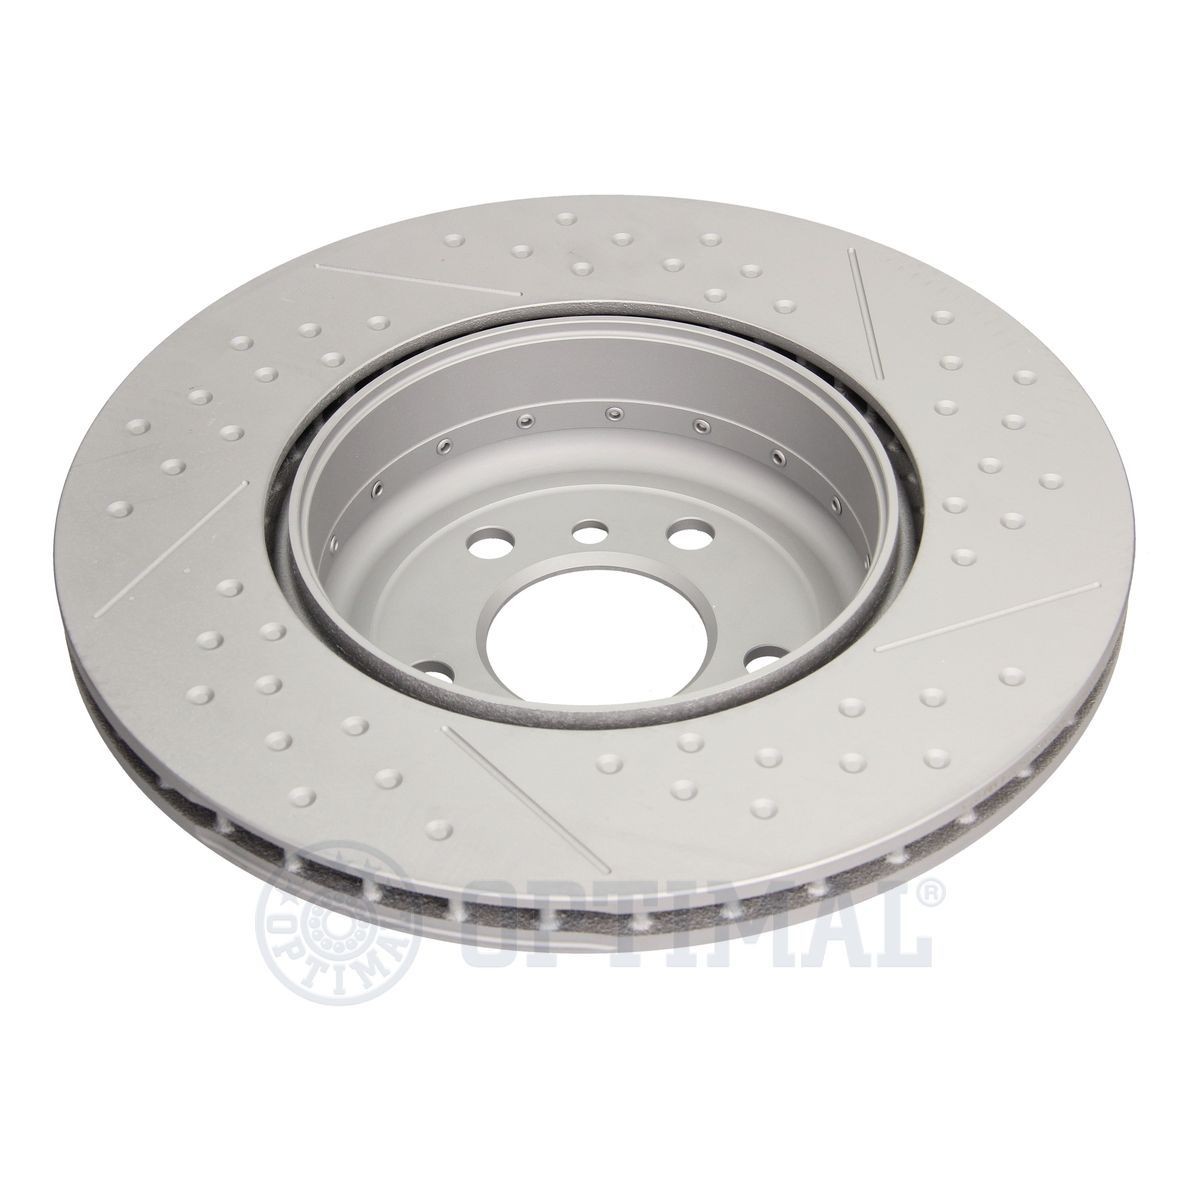 310X28 OPTIMAL Front Axle, 310x28mm, 5/8, Vented Ø: 310mm, Brake Disc Thickness: 28mm Brake rotor BS-3510 buy